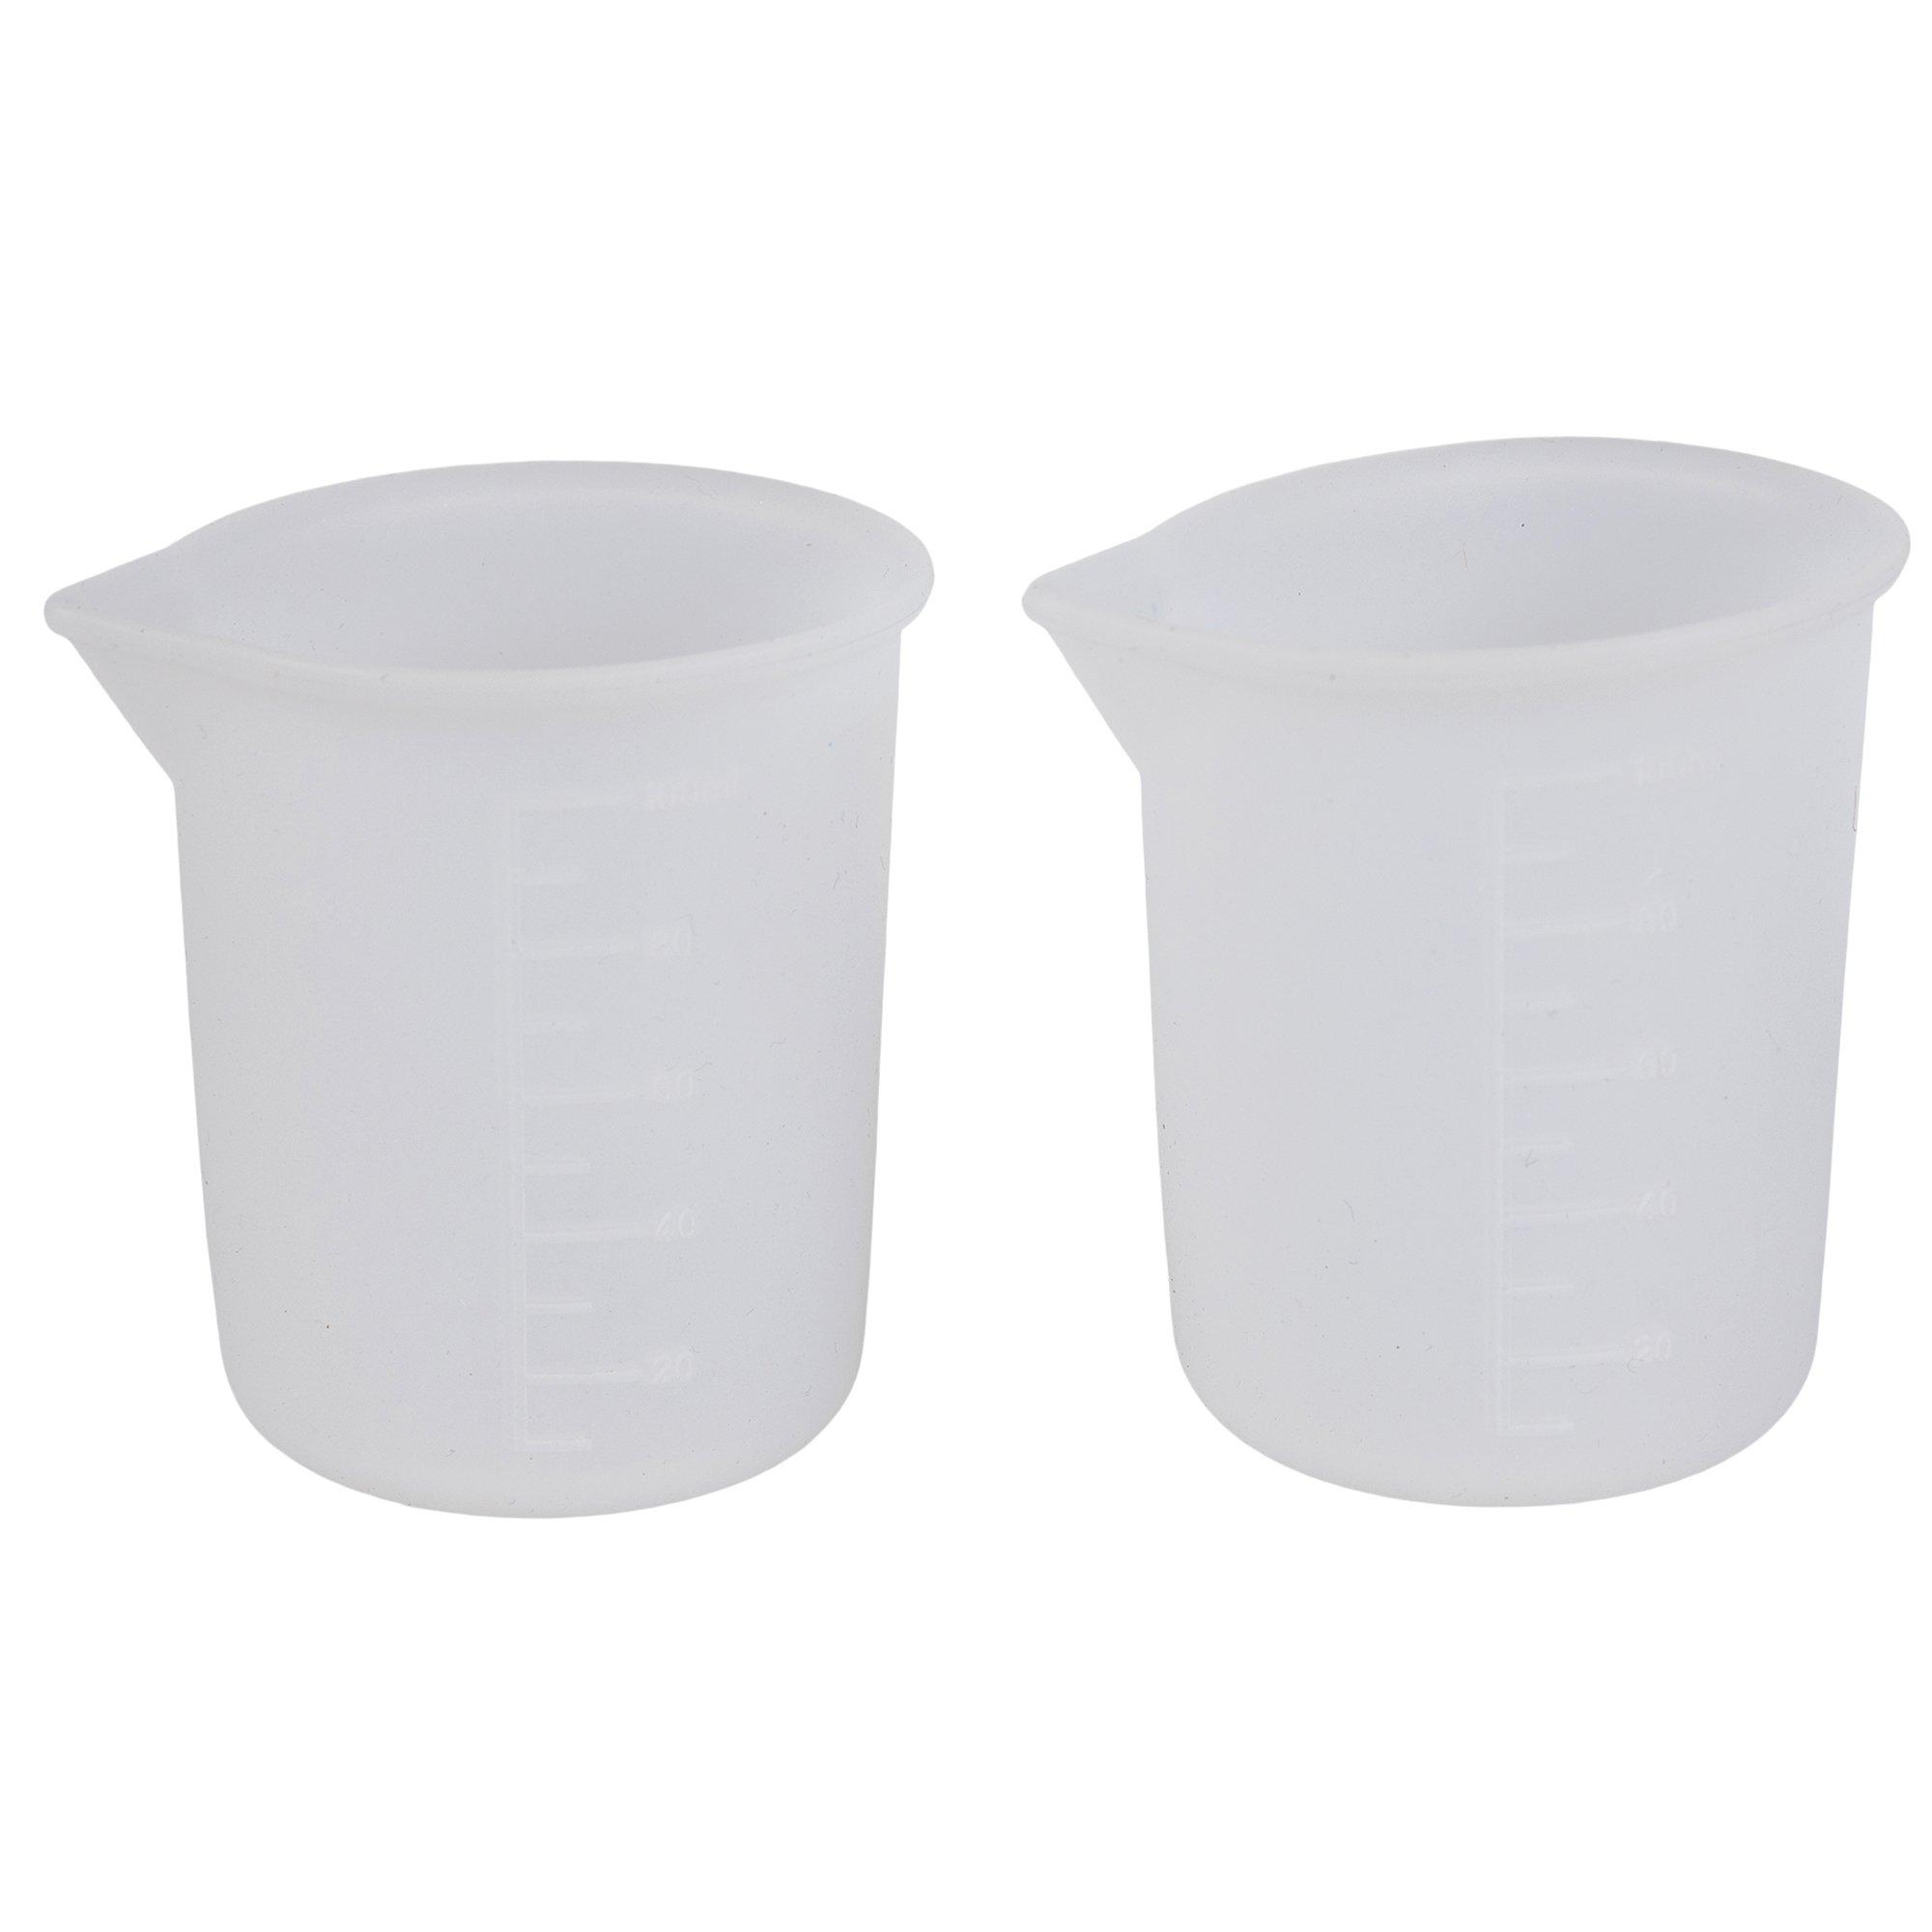 milk measuring cup Mixing Cups Glue Mixing Cups Flexible Silicone